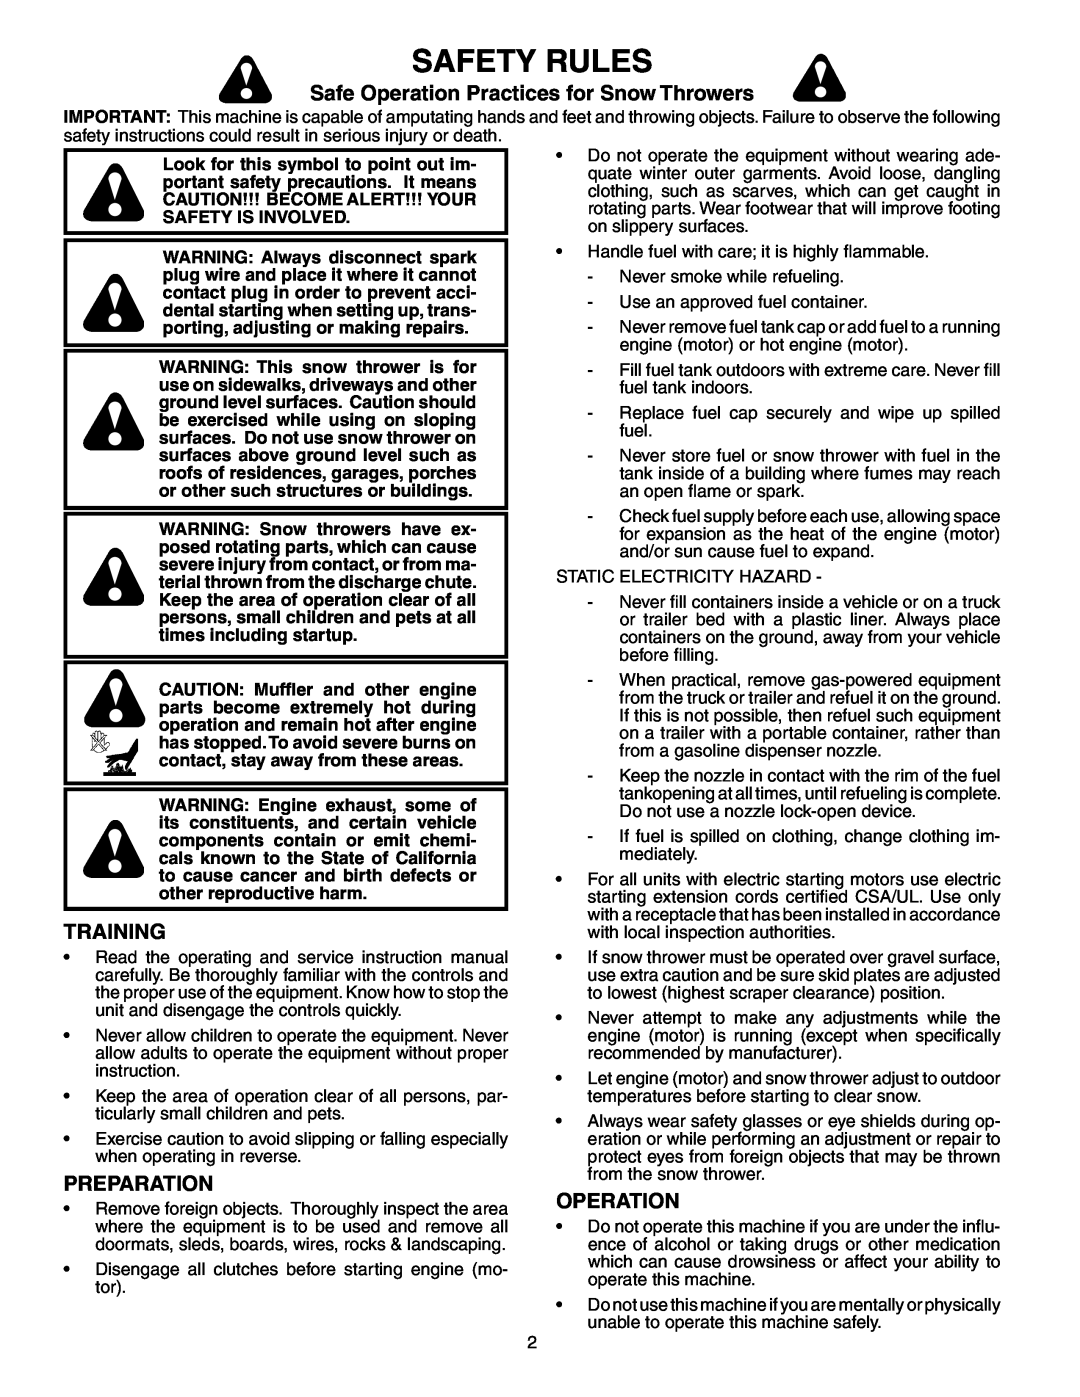 Poulan 192038 owner manual Safety Rules, Safe Operation Practices for Snow Throwers, Training, Preparation 